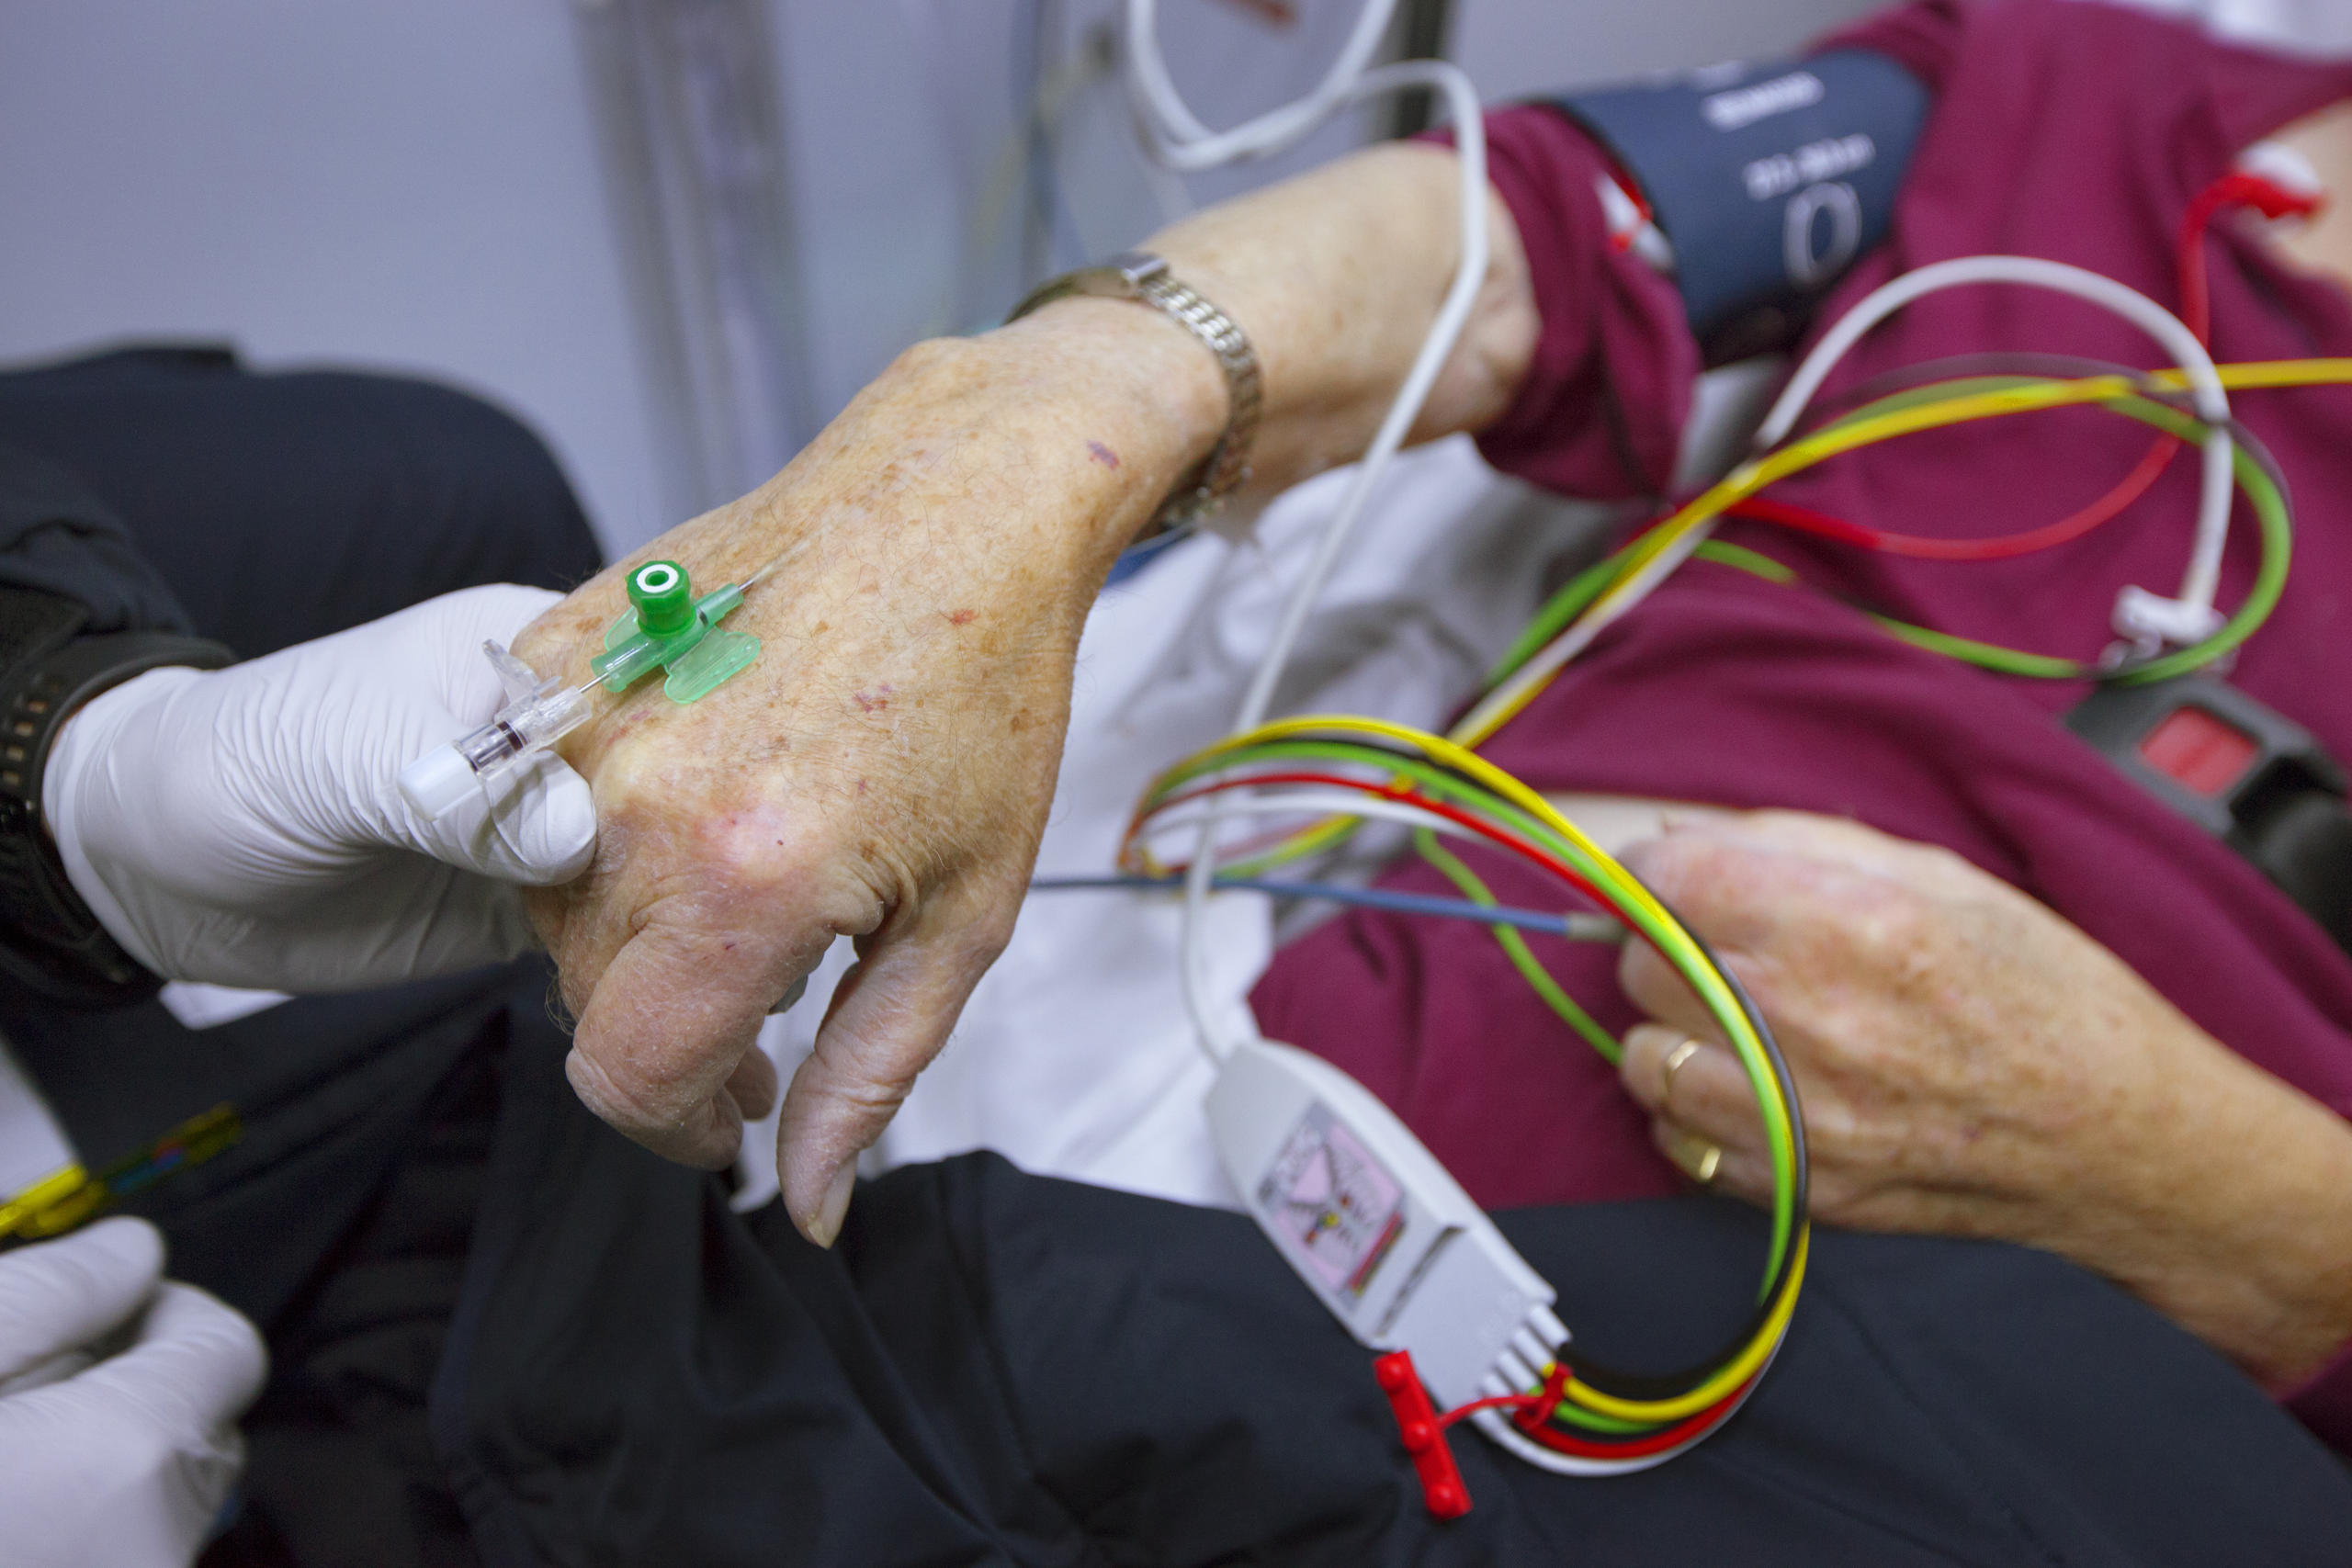 Patients hand with infusion